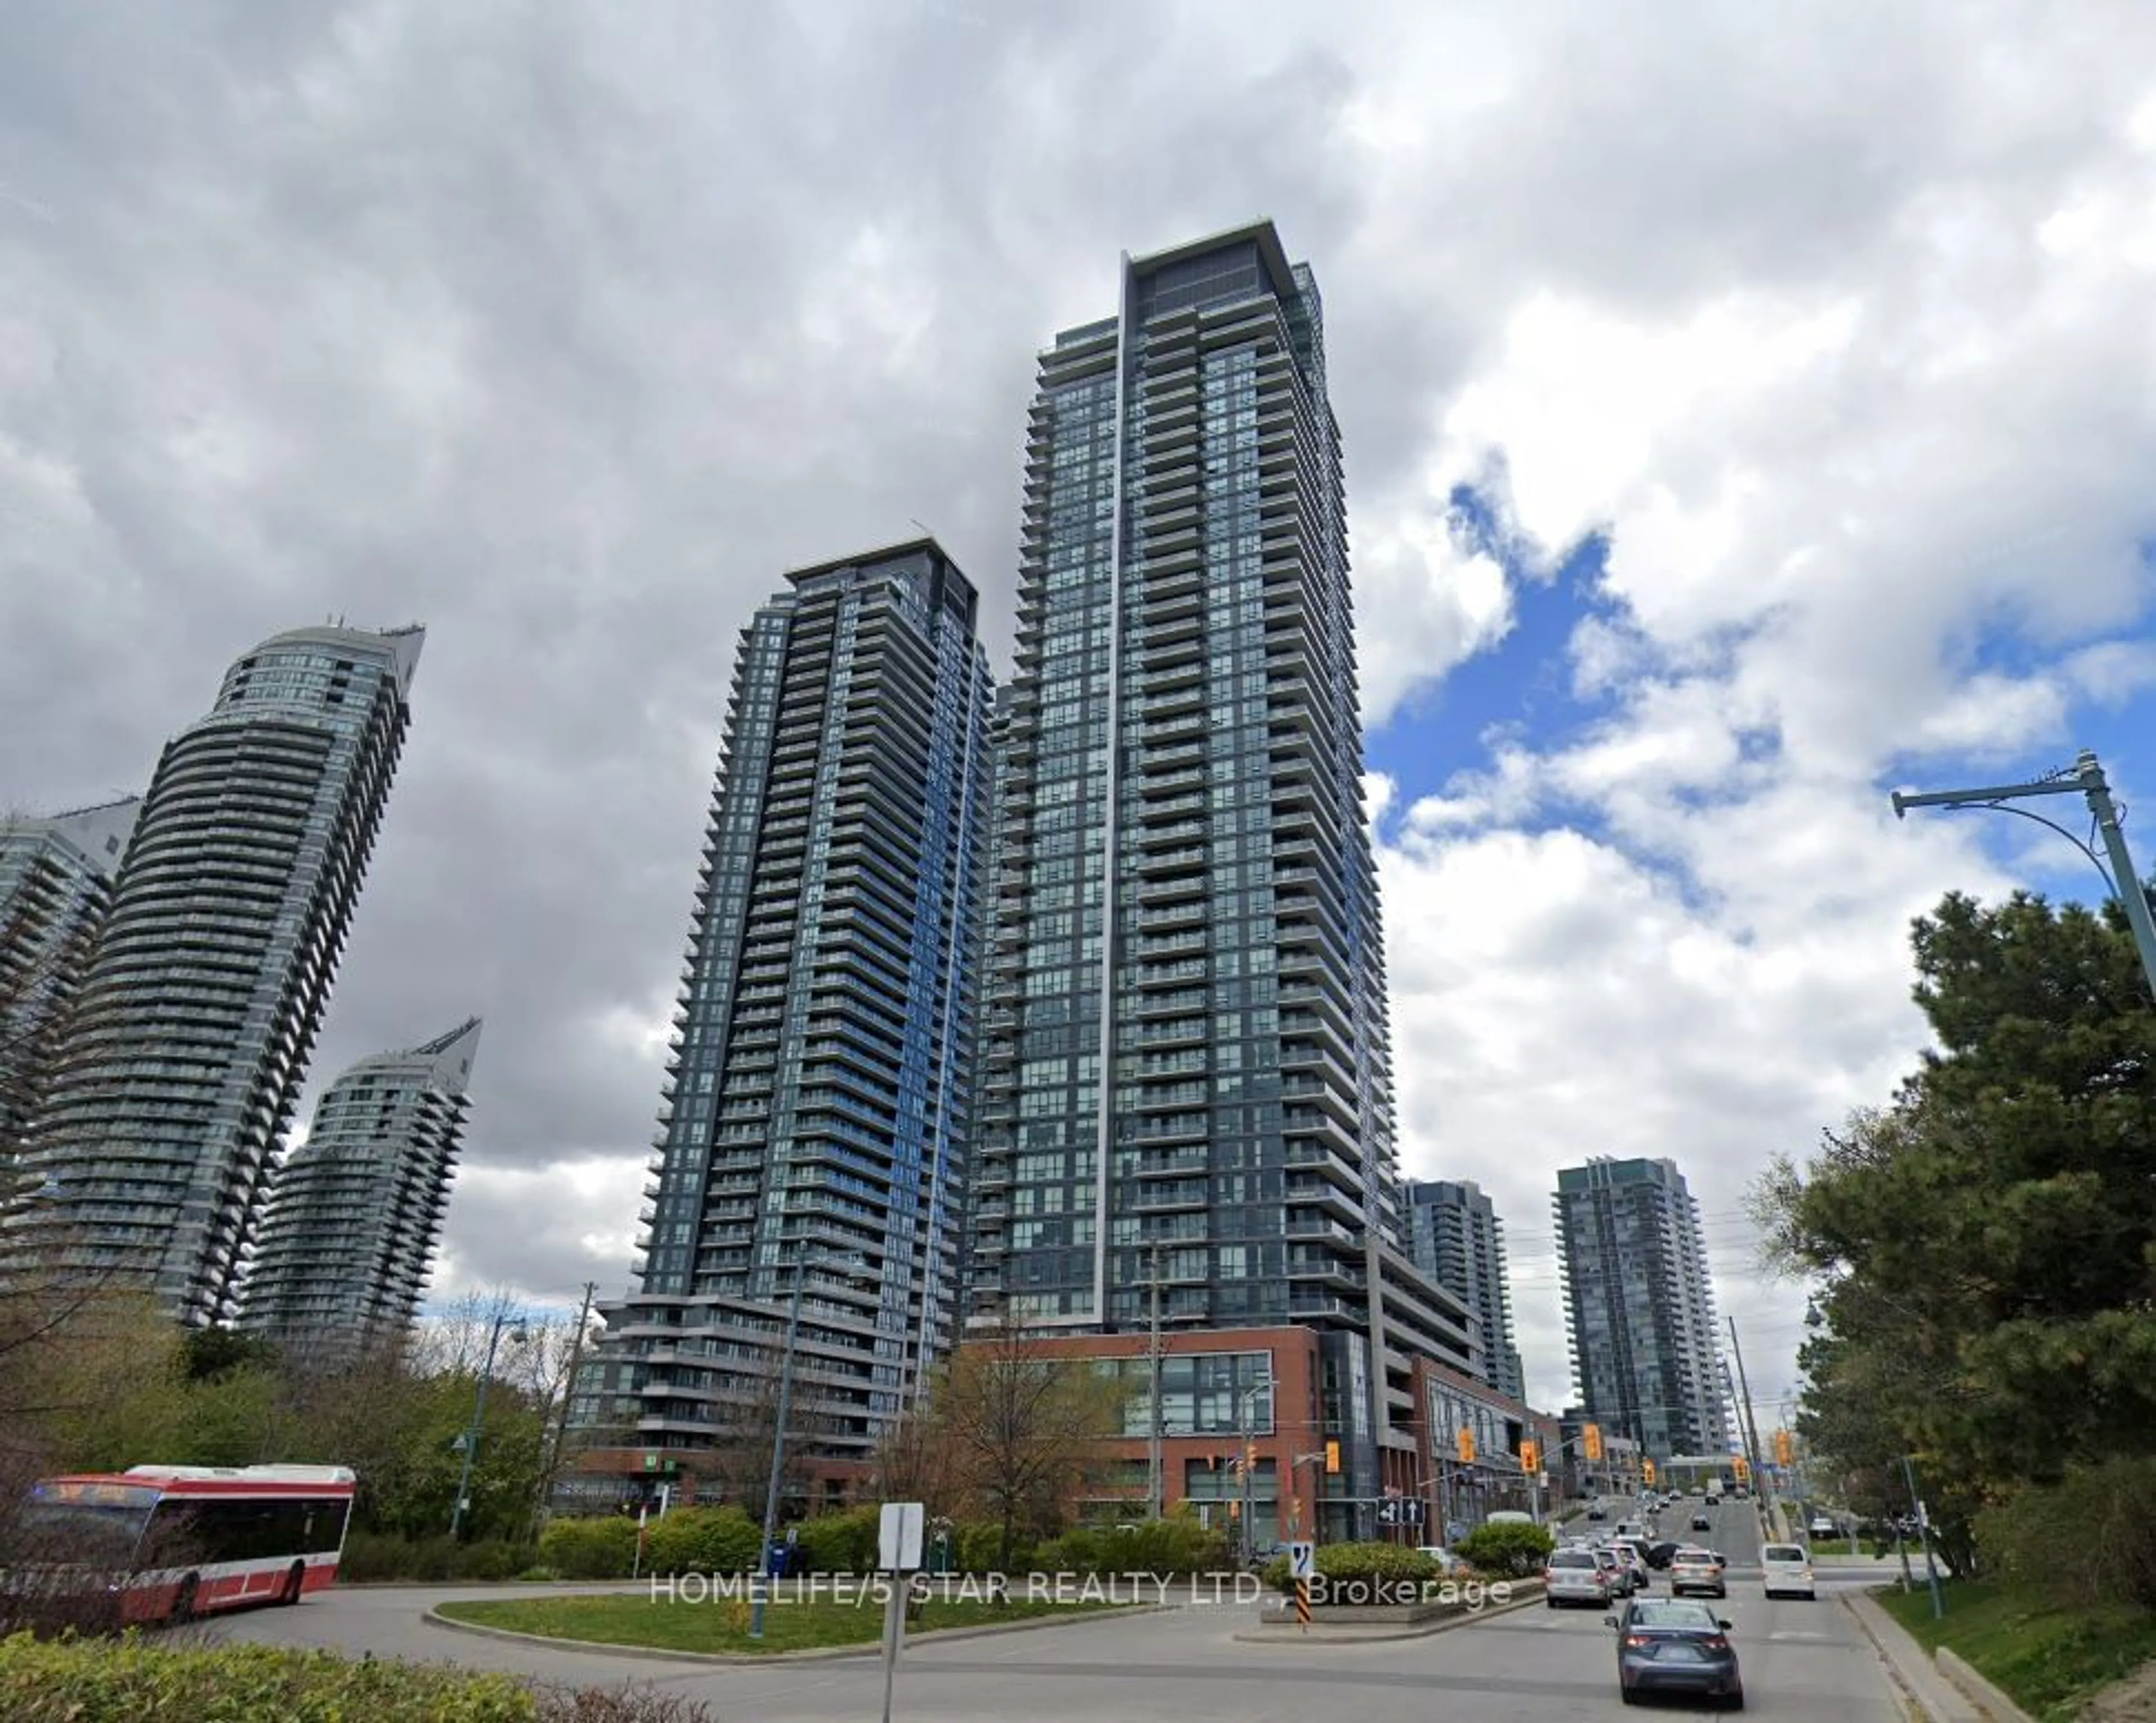 A pic from exterior of the house or condo for 2200 Lake Shore Blvd #906, Toronto Ontario M8V 1A4